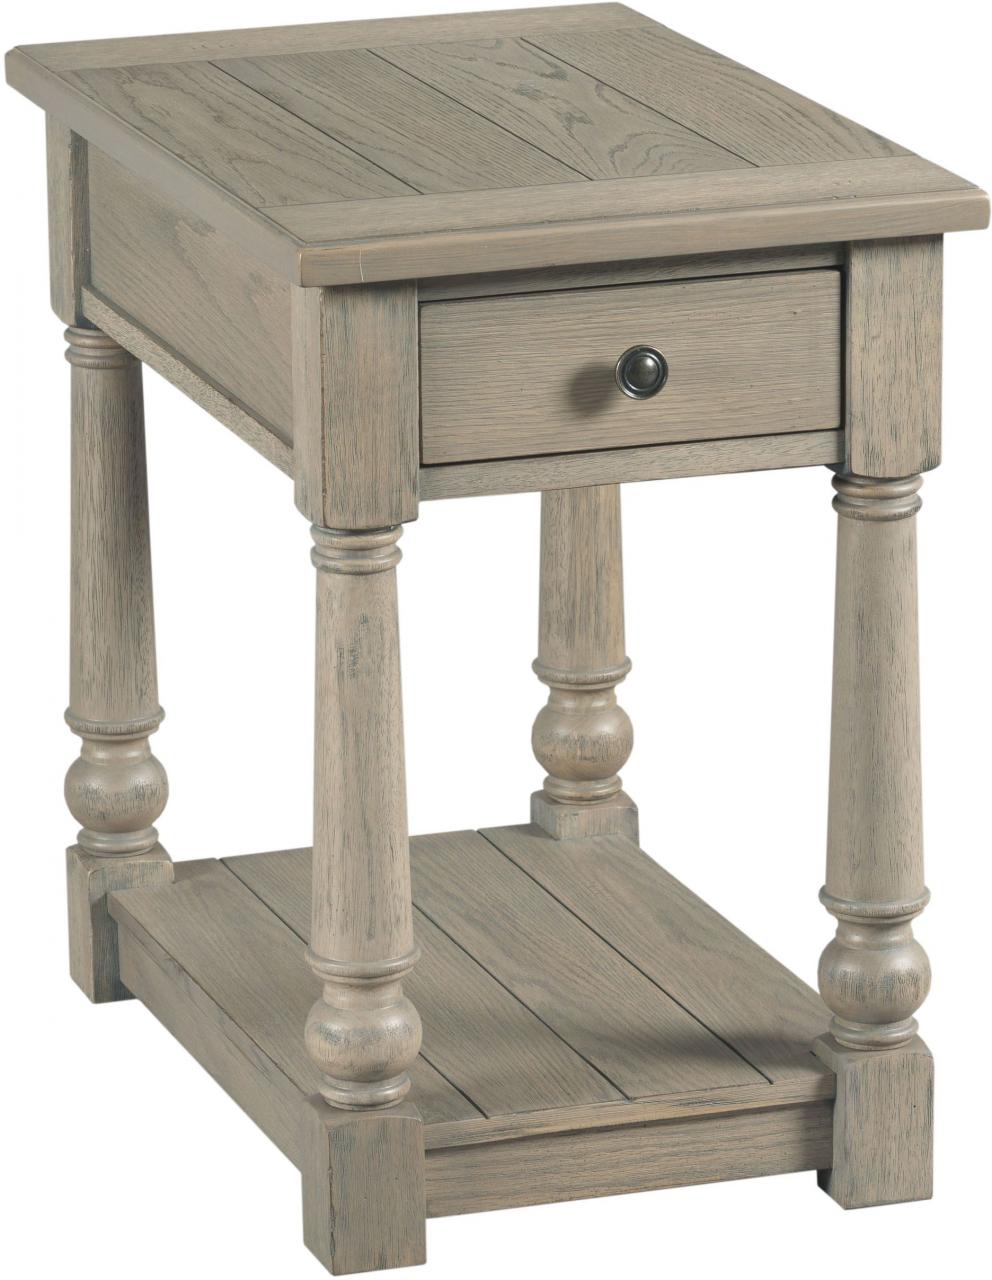 England Furniture Outland Chairside Table